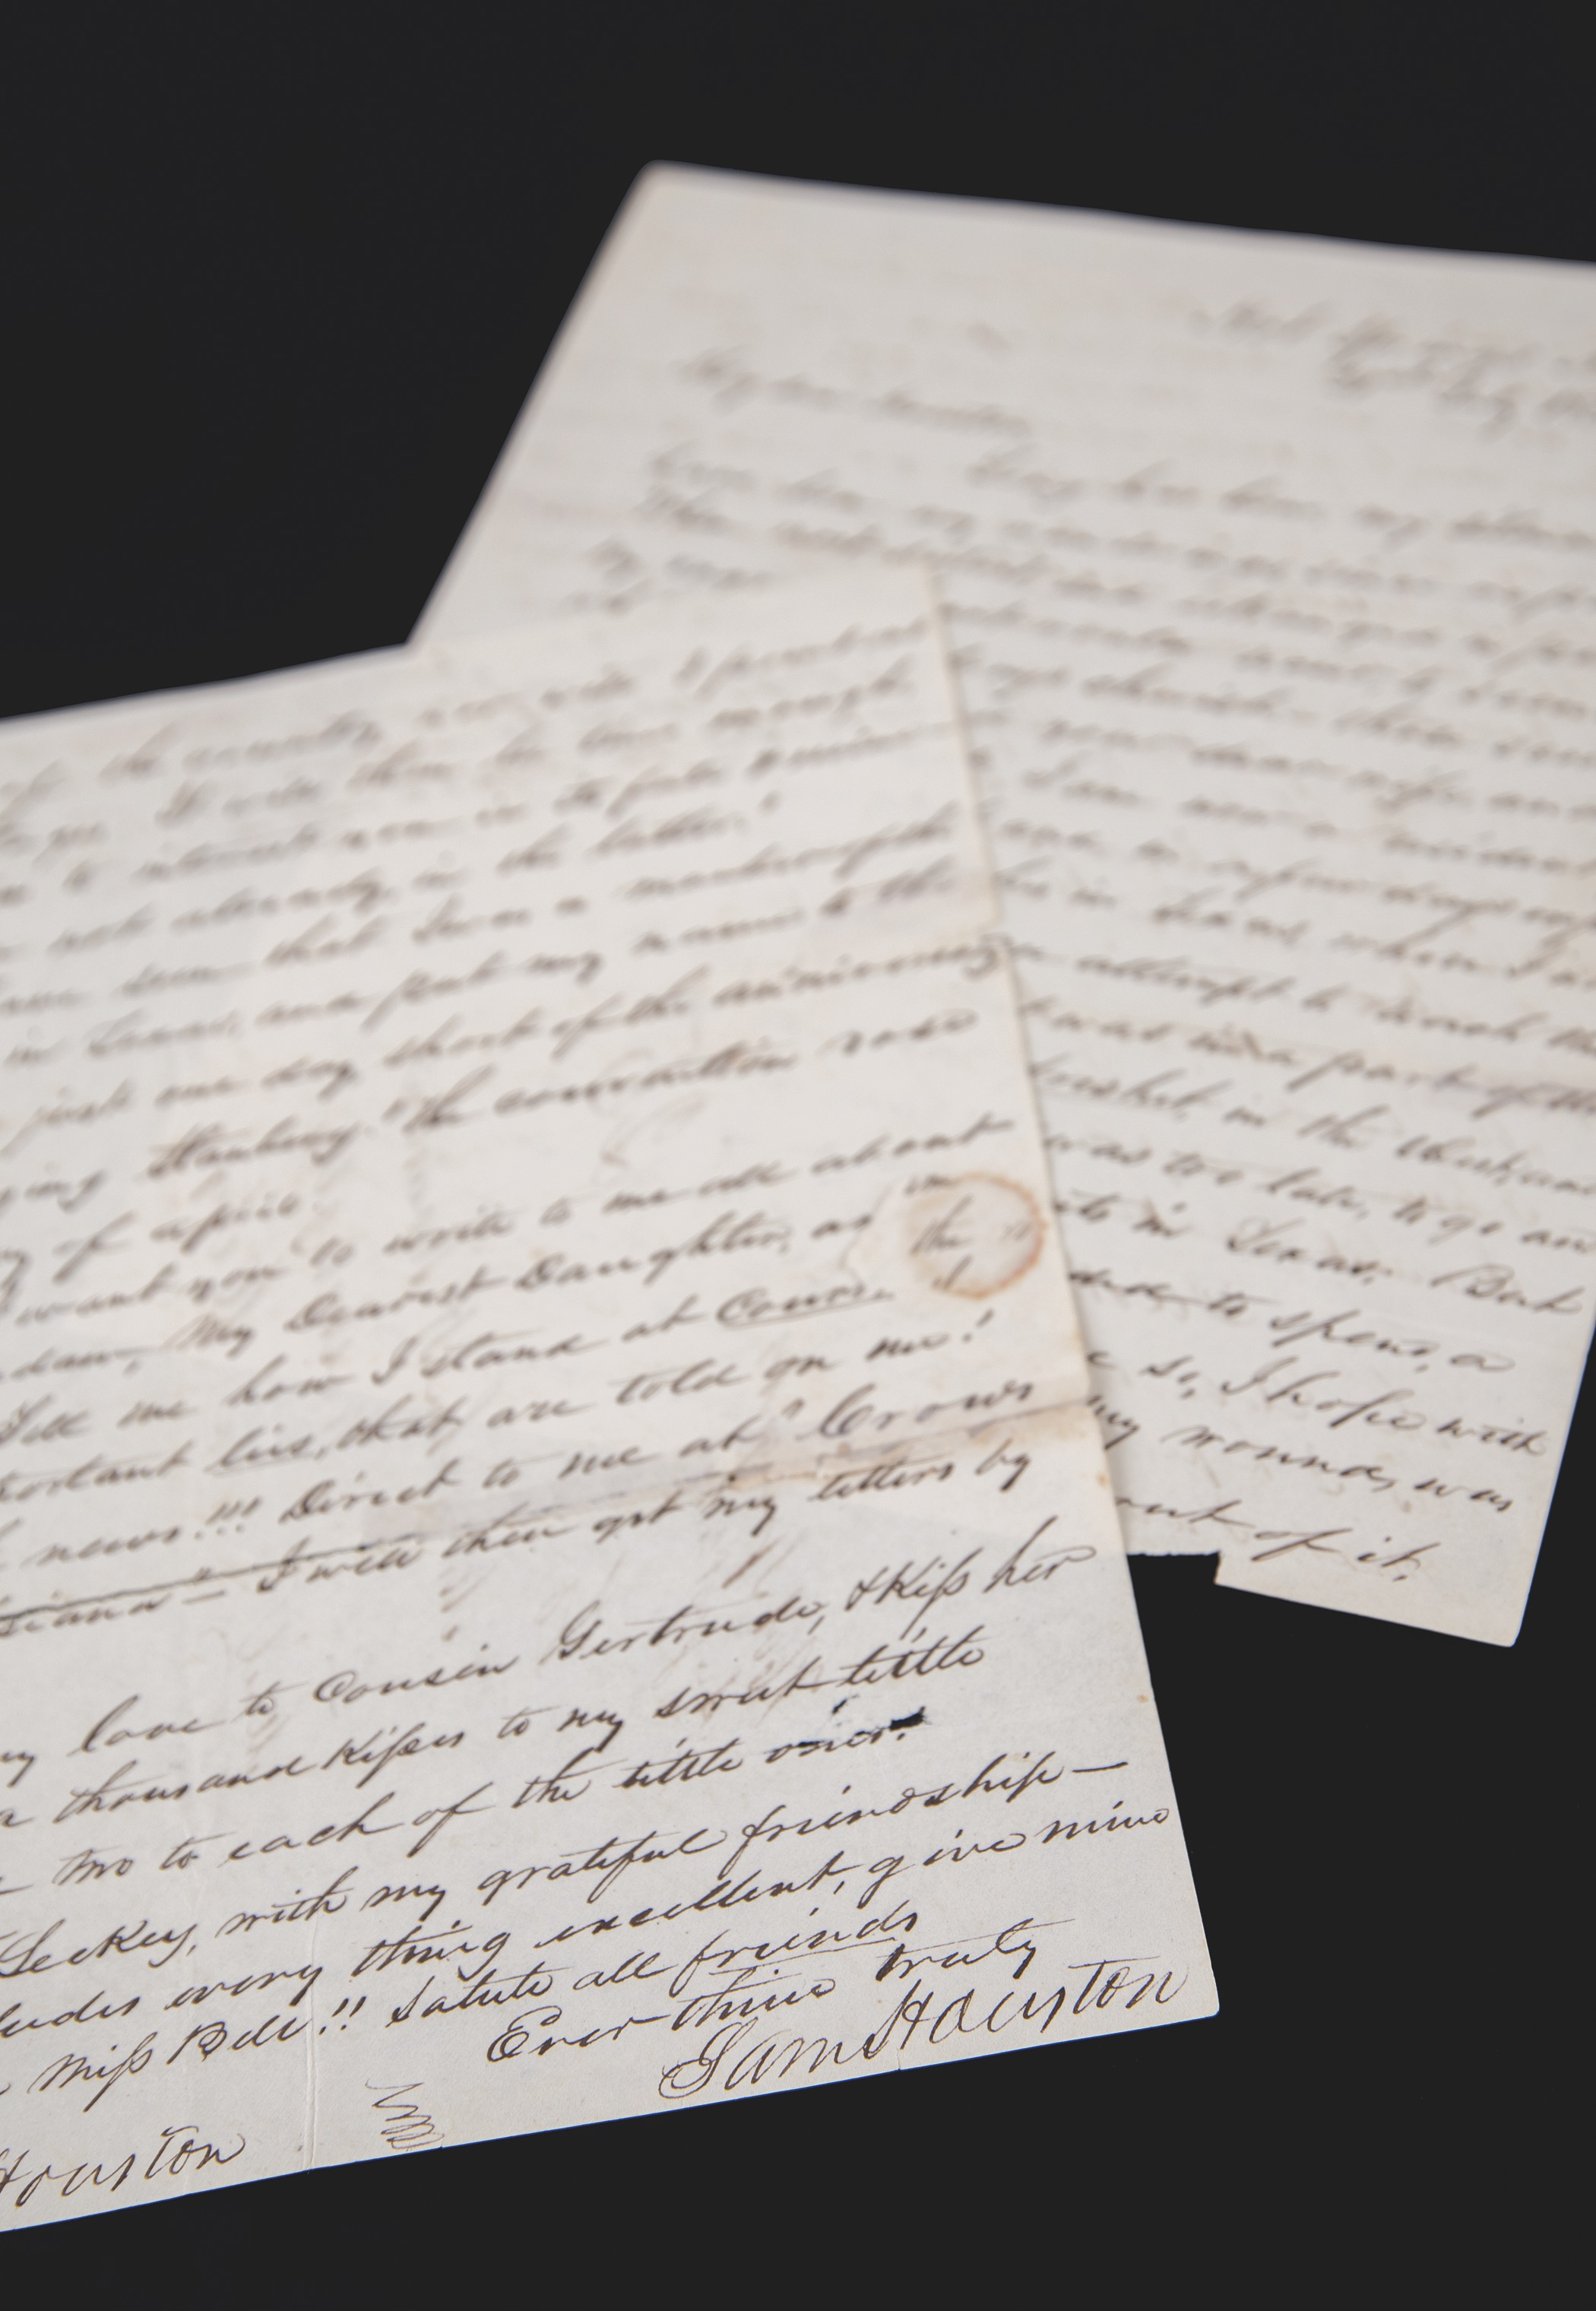 Lot #155 Sam Houston Autograph Letter Signed to Brother on His Arrival in Texas: "Texas is the finest portion of the Globe, that has, ever blessed my vision" - Image 1